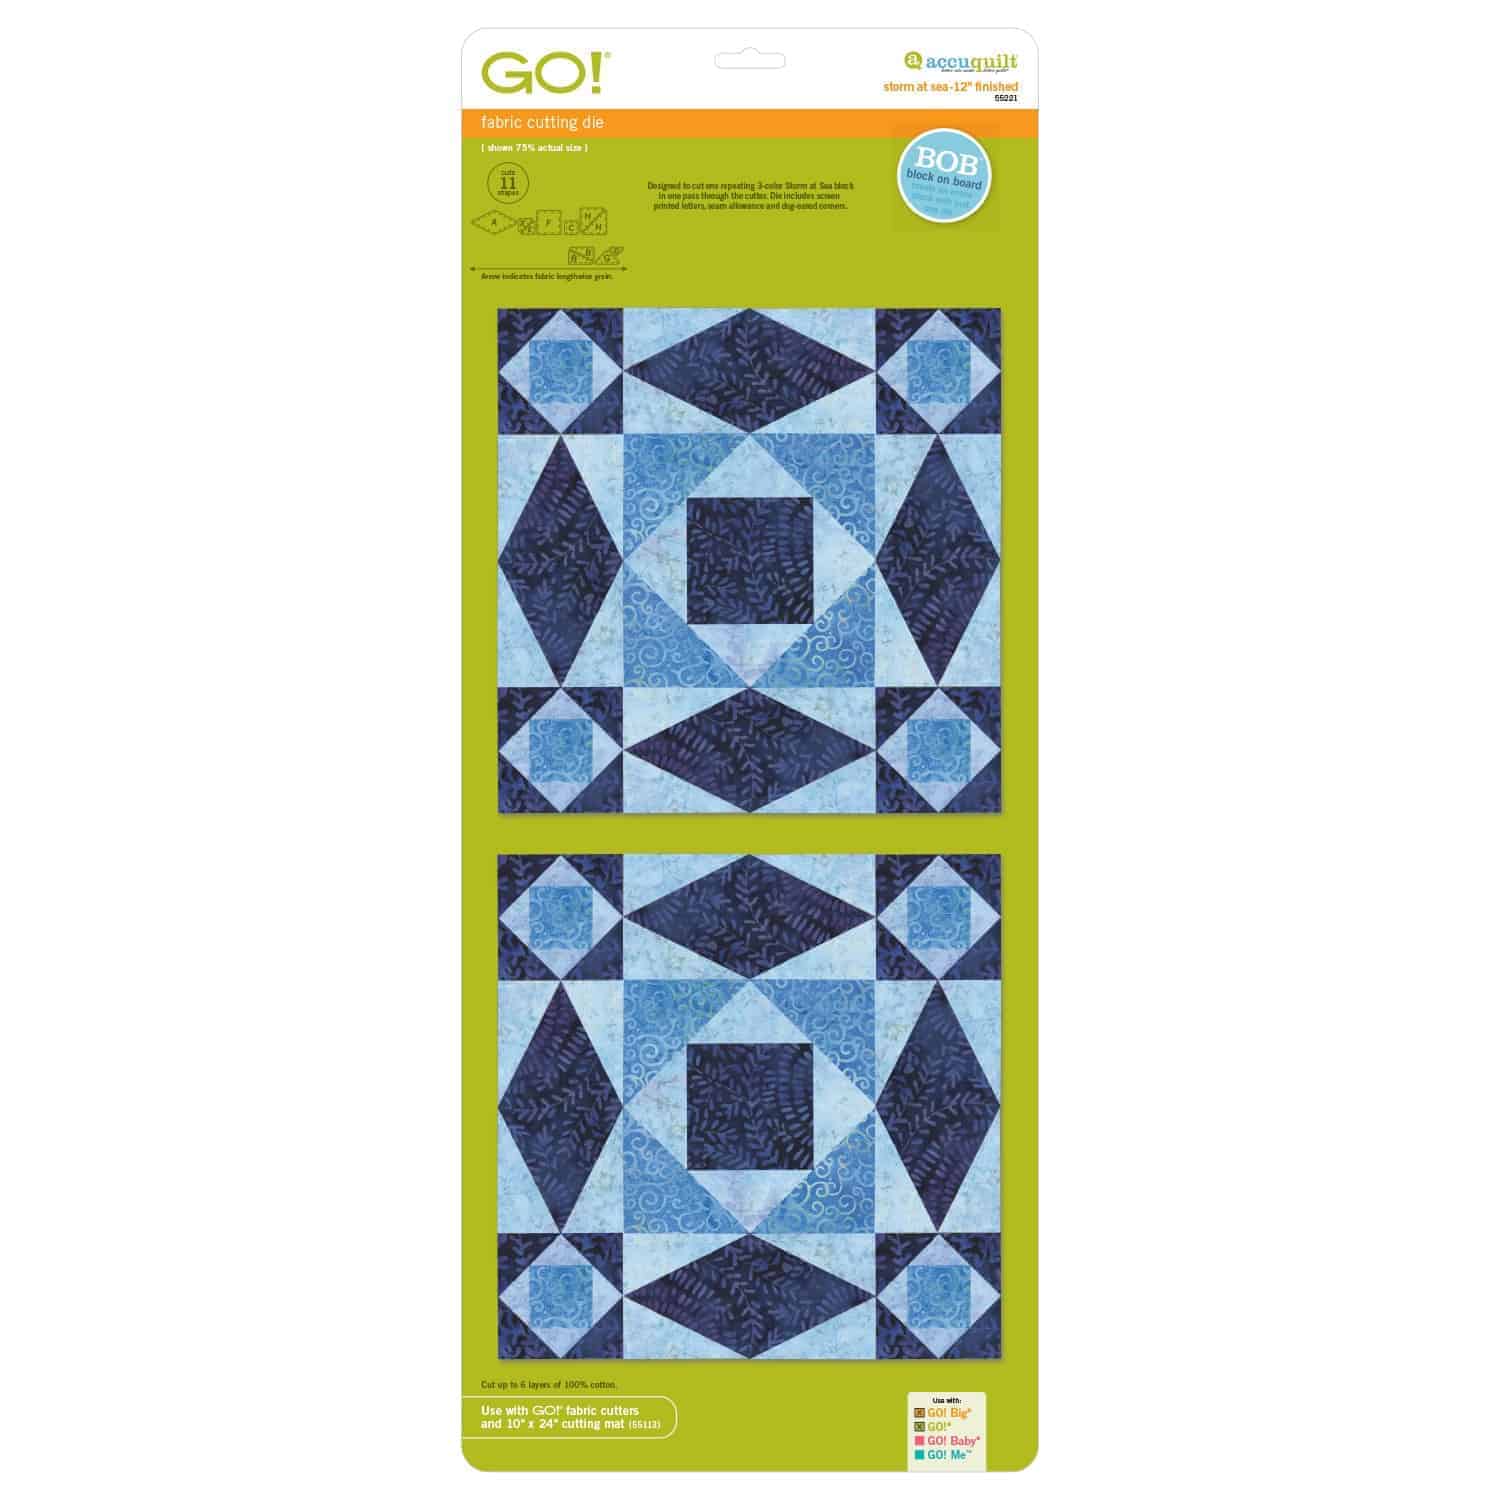 B-Sew Inn - Accuquilt GO! Storm at Sea-12″ Finished Die – Fabric Cutter Die  55221